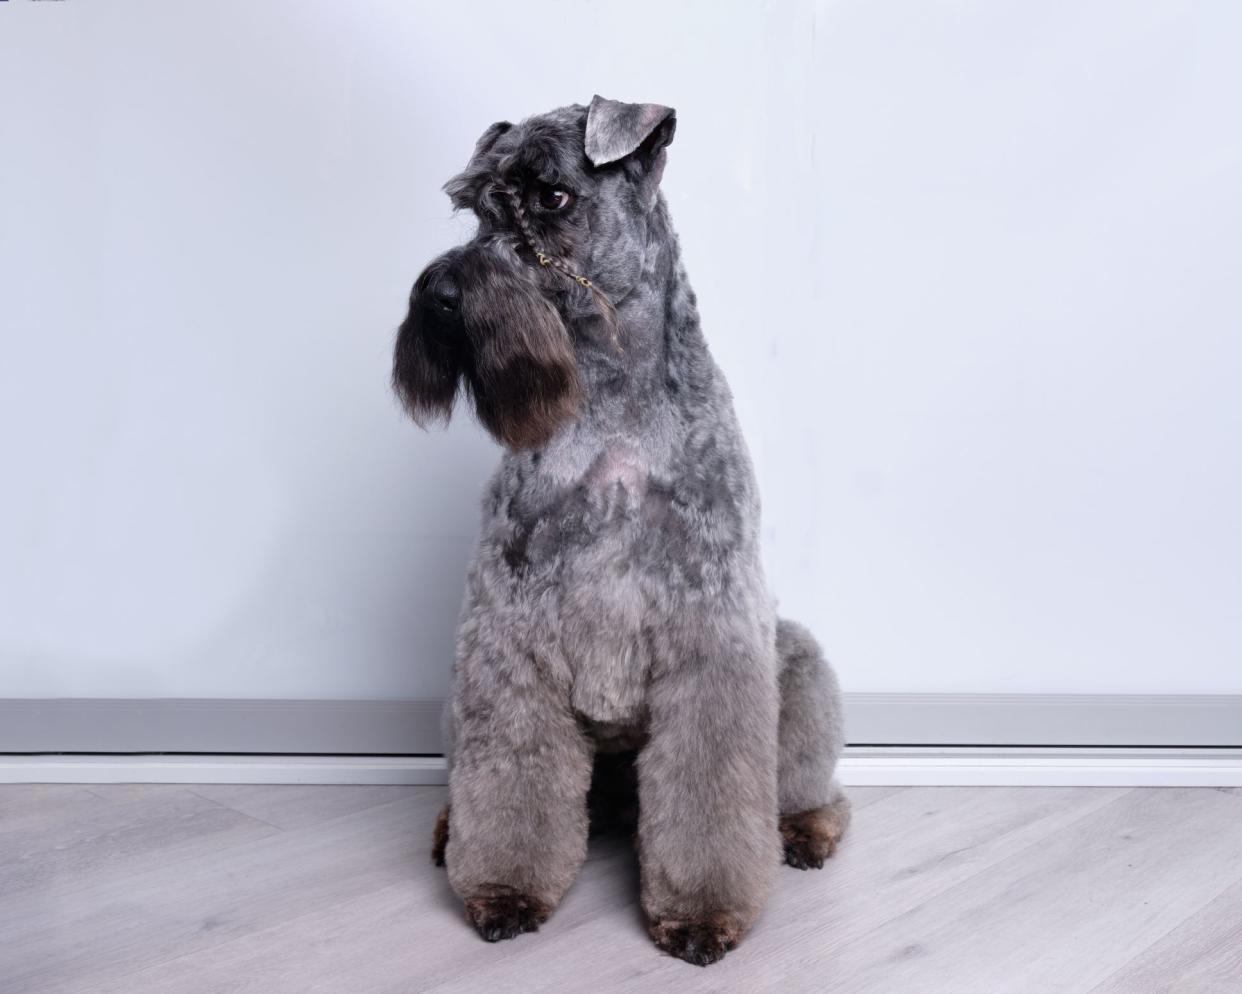 A Kerry Blue Terrier sitting on a grey floor against a light grey wall, looking off towards the left